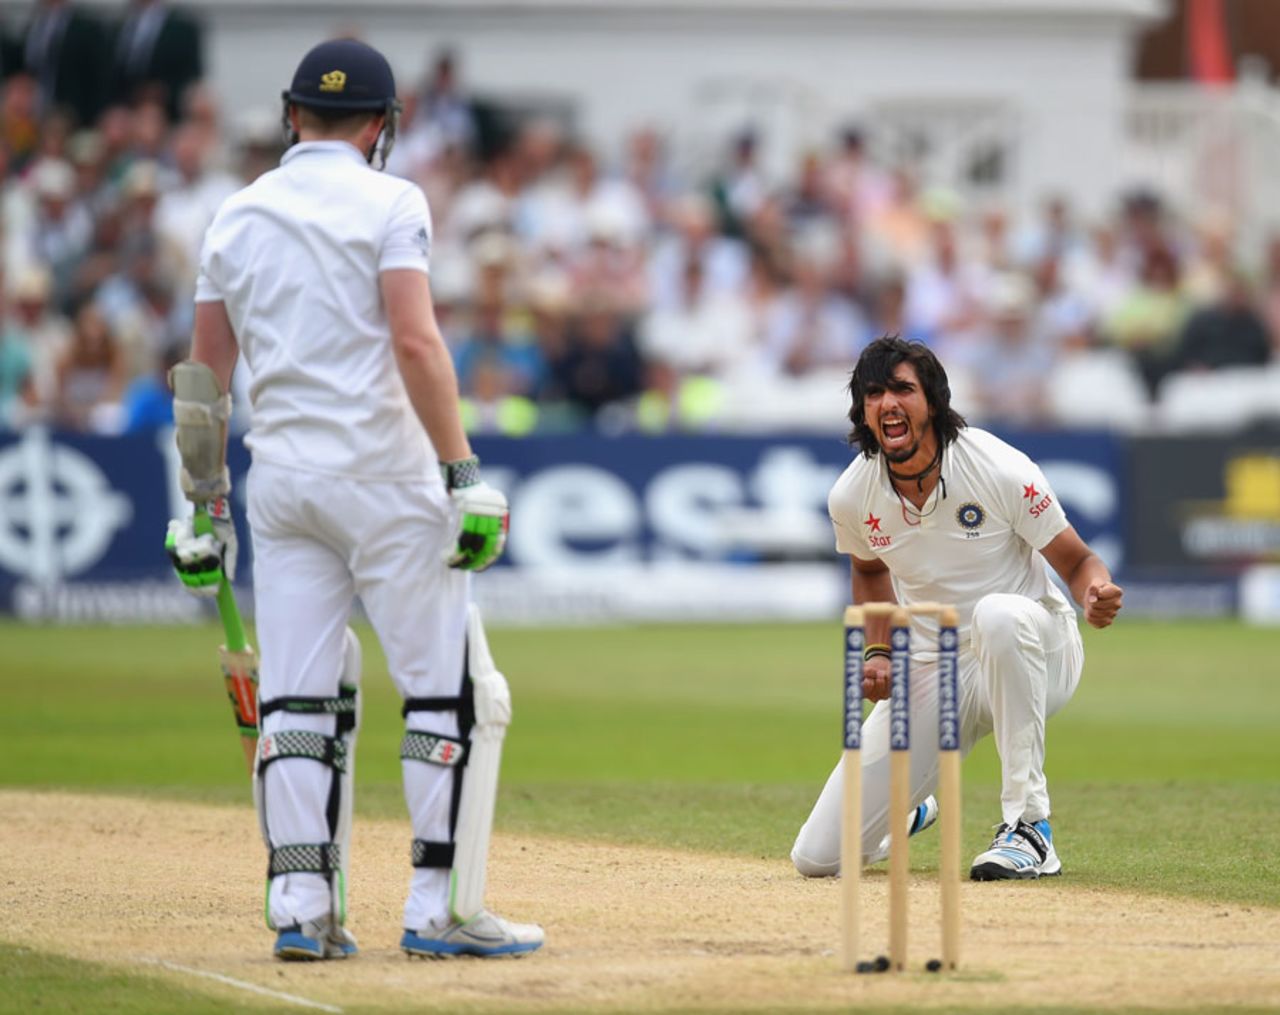 Ishant Sharma exults after trapping Sam Robson lbw, England v India, 1st Investec Test, Trent Bridge, 3rd day, July 11, 2014